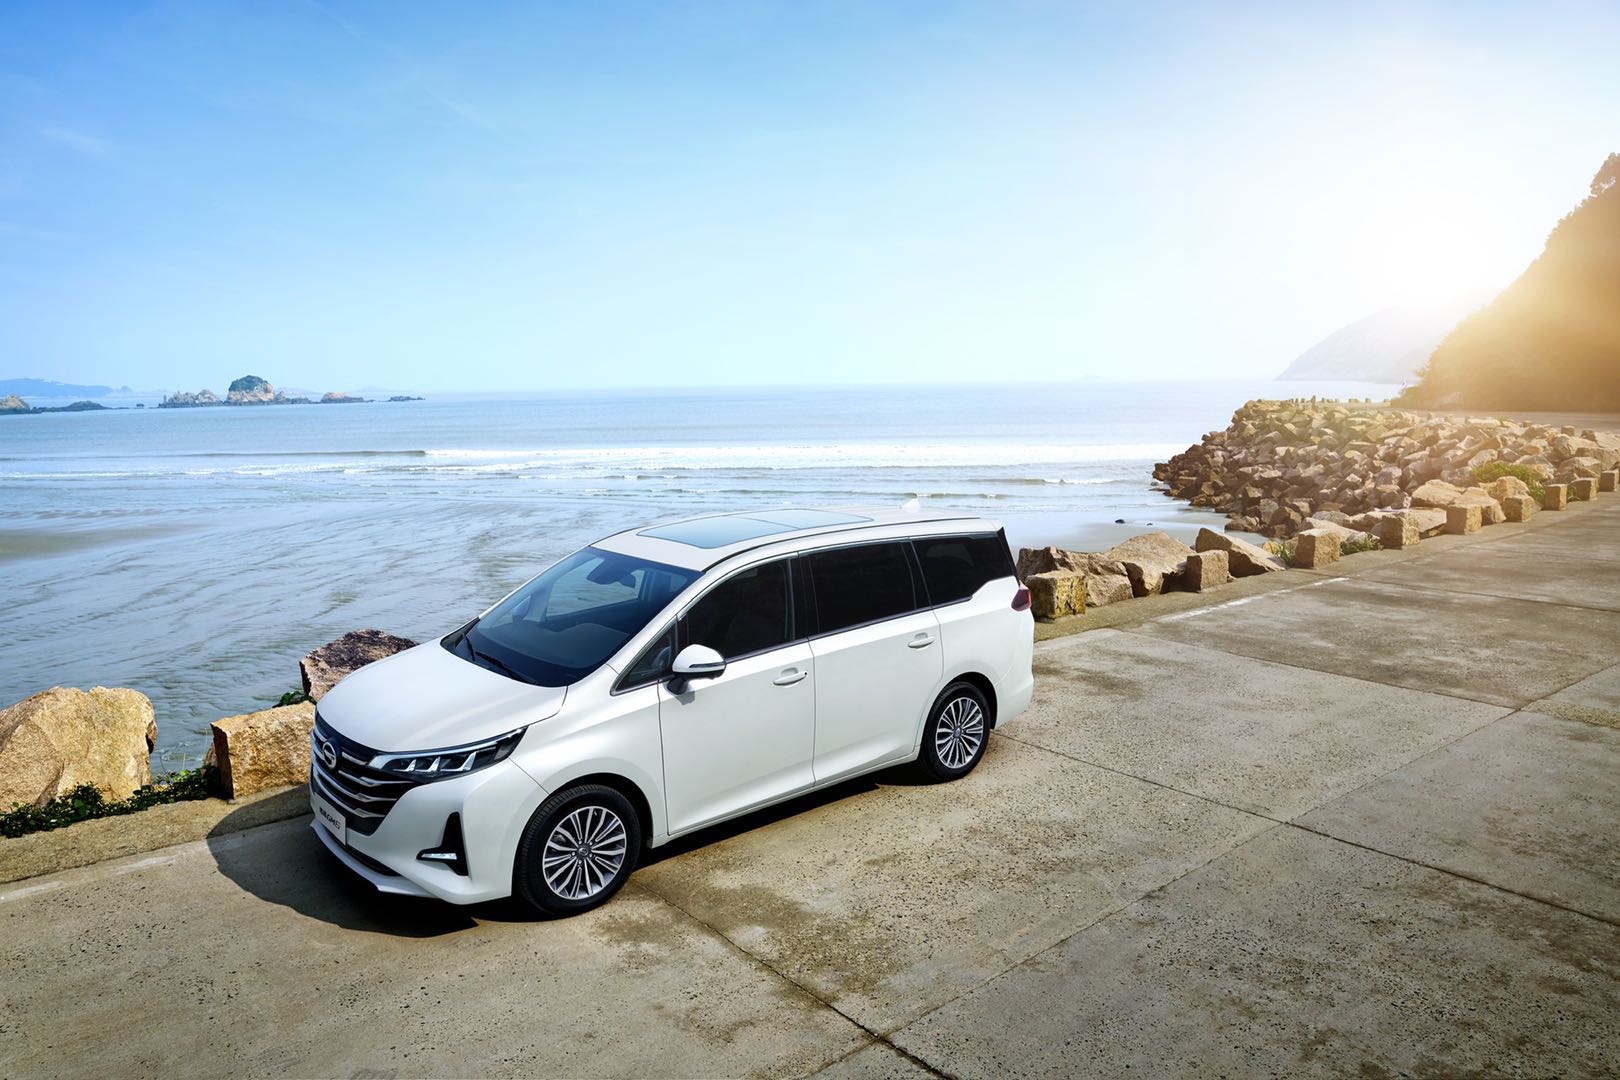 GAC Motor Co., Ltd., Tuesday, July 7, 2020, Press release picture